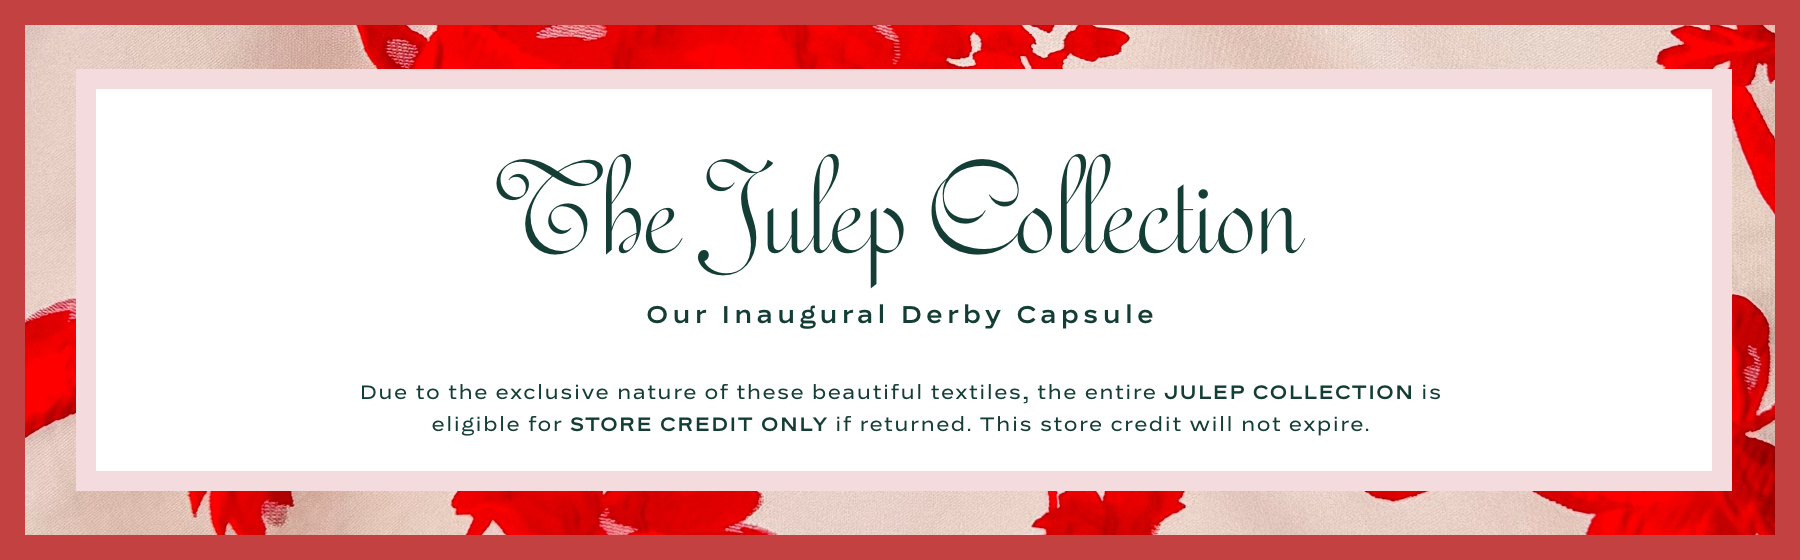 The Julep Collection